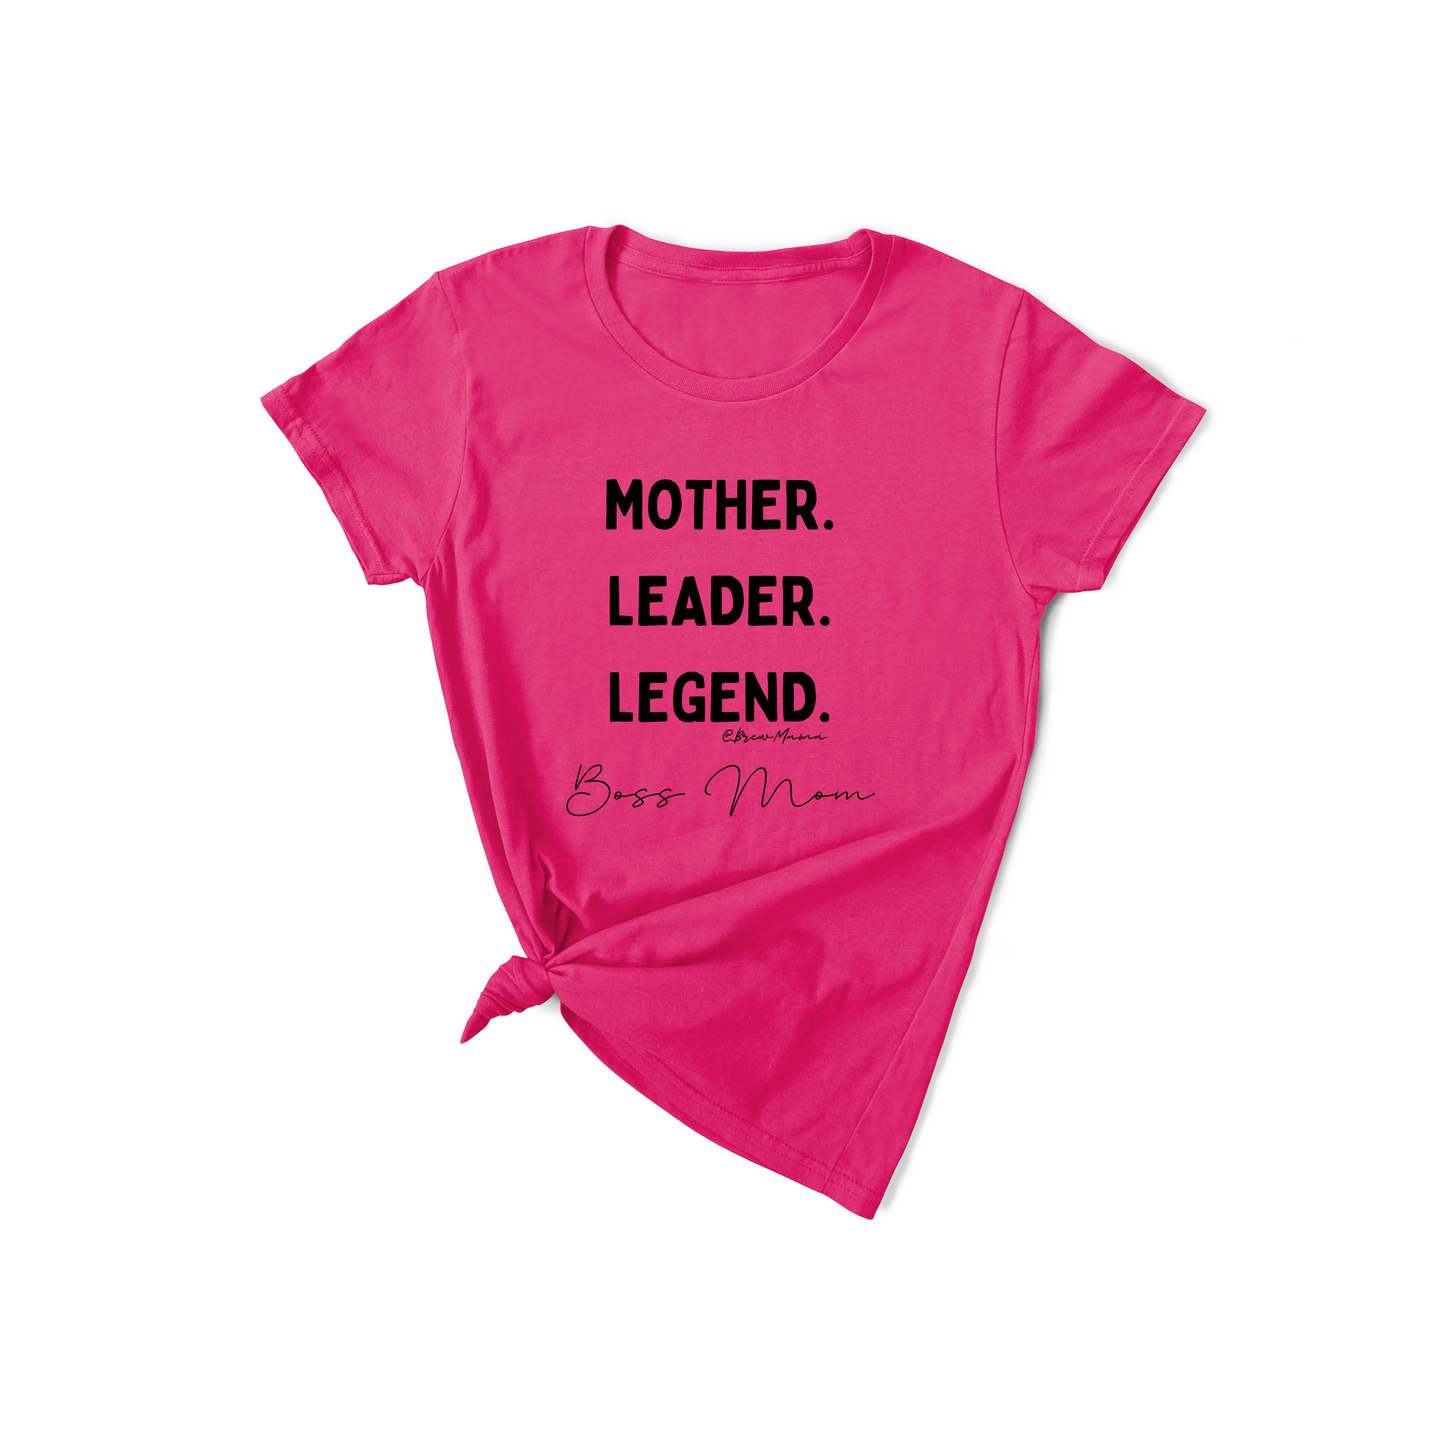 Mother Leader Legend Empowerment Tee - Brew Mama